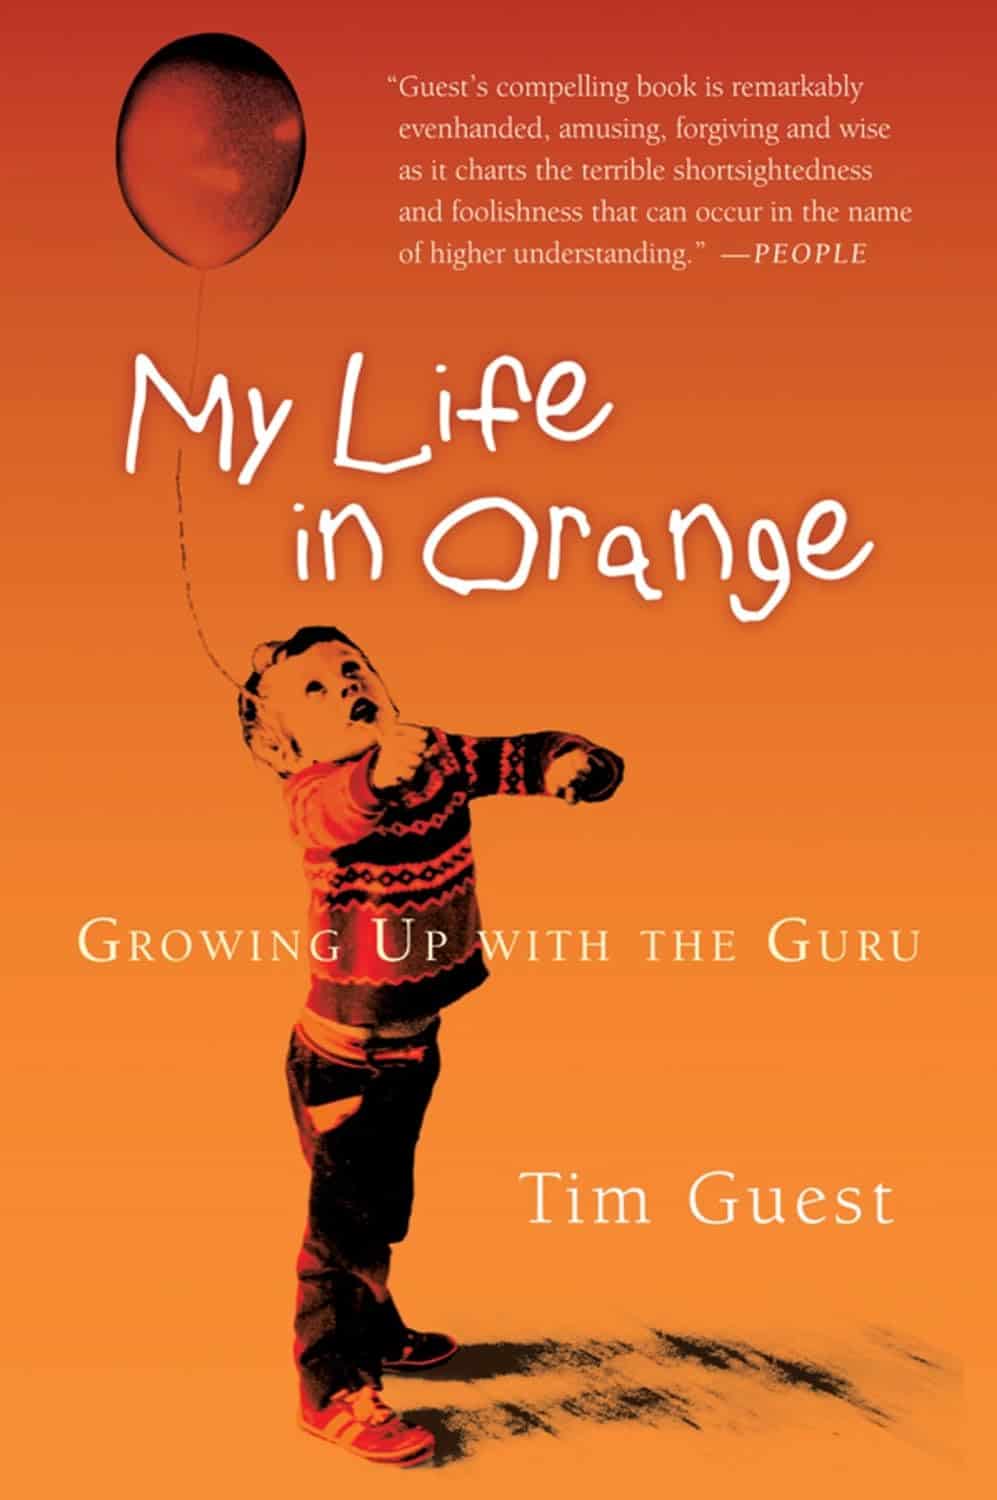 My Life in Orange by Tim Guest